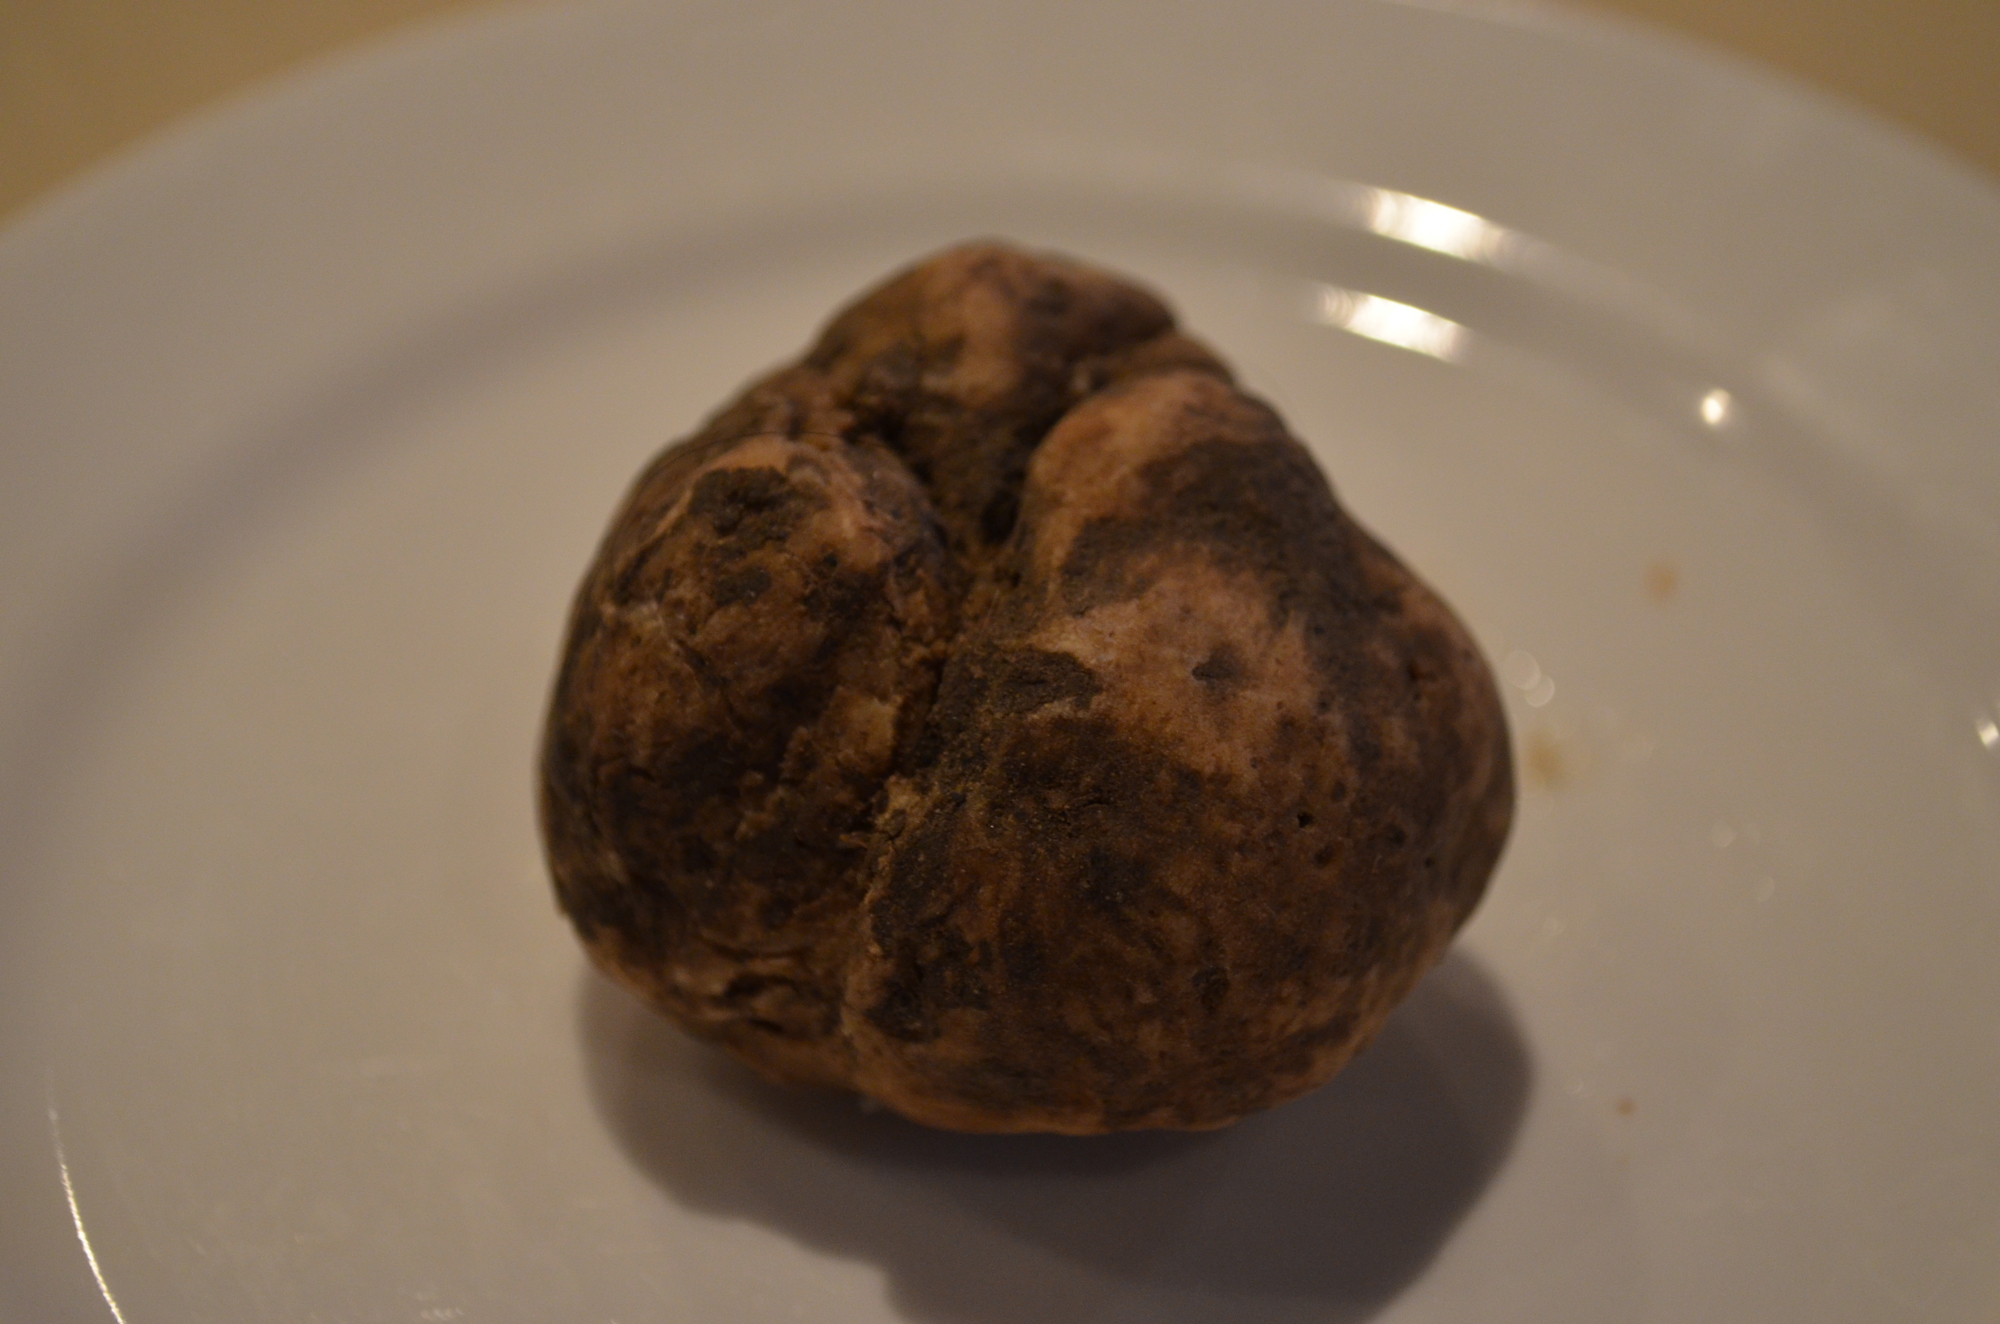 This golf ball-sized truffle is worth around $100.